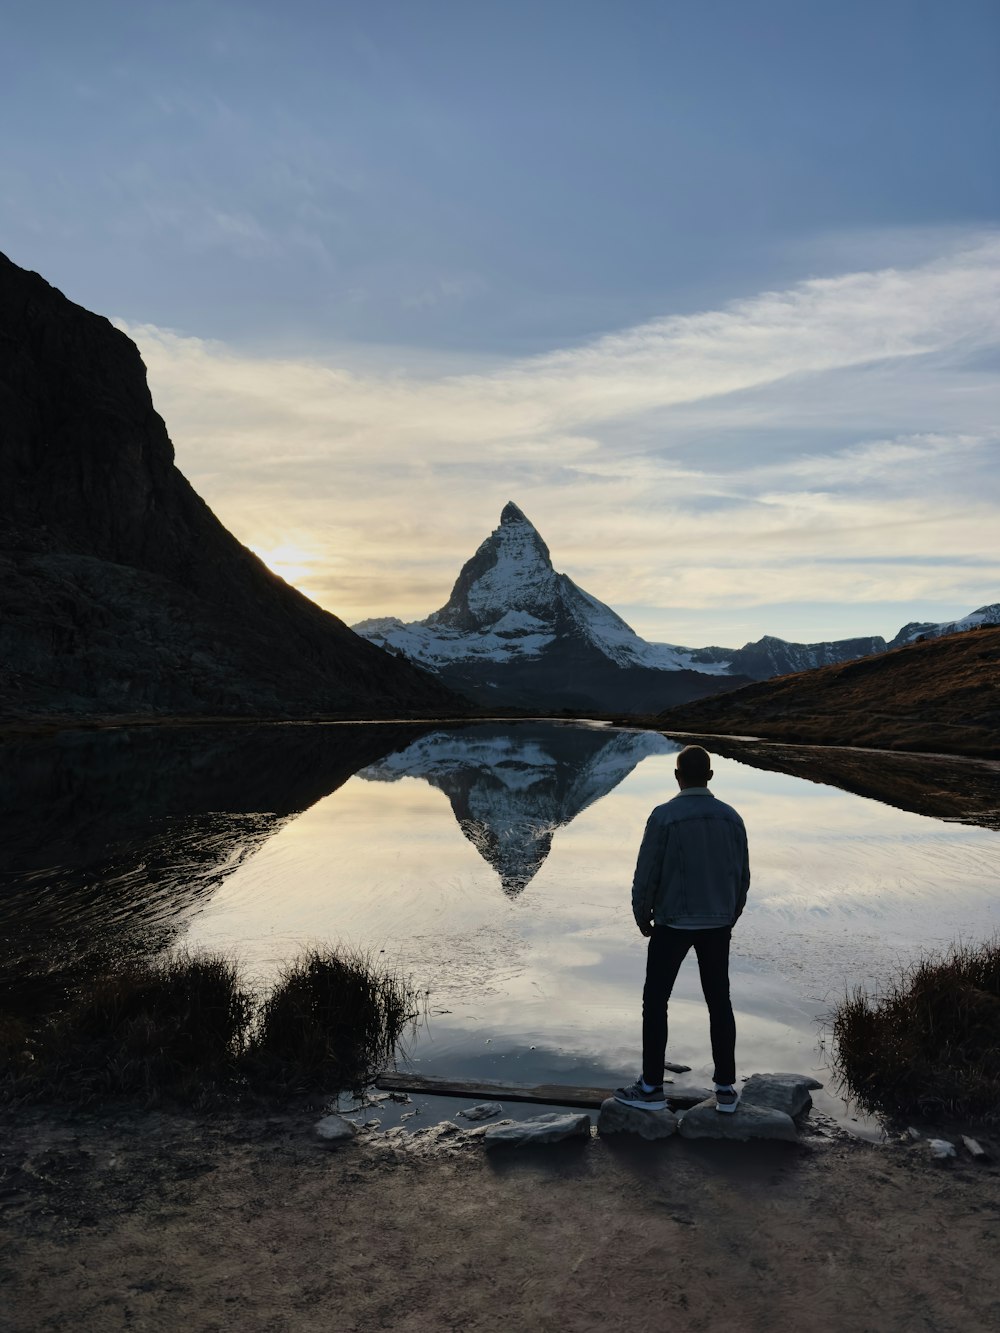 a man standing on a rock in front of a lake with a mountain in the background